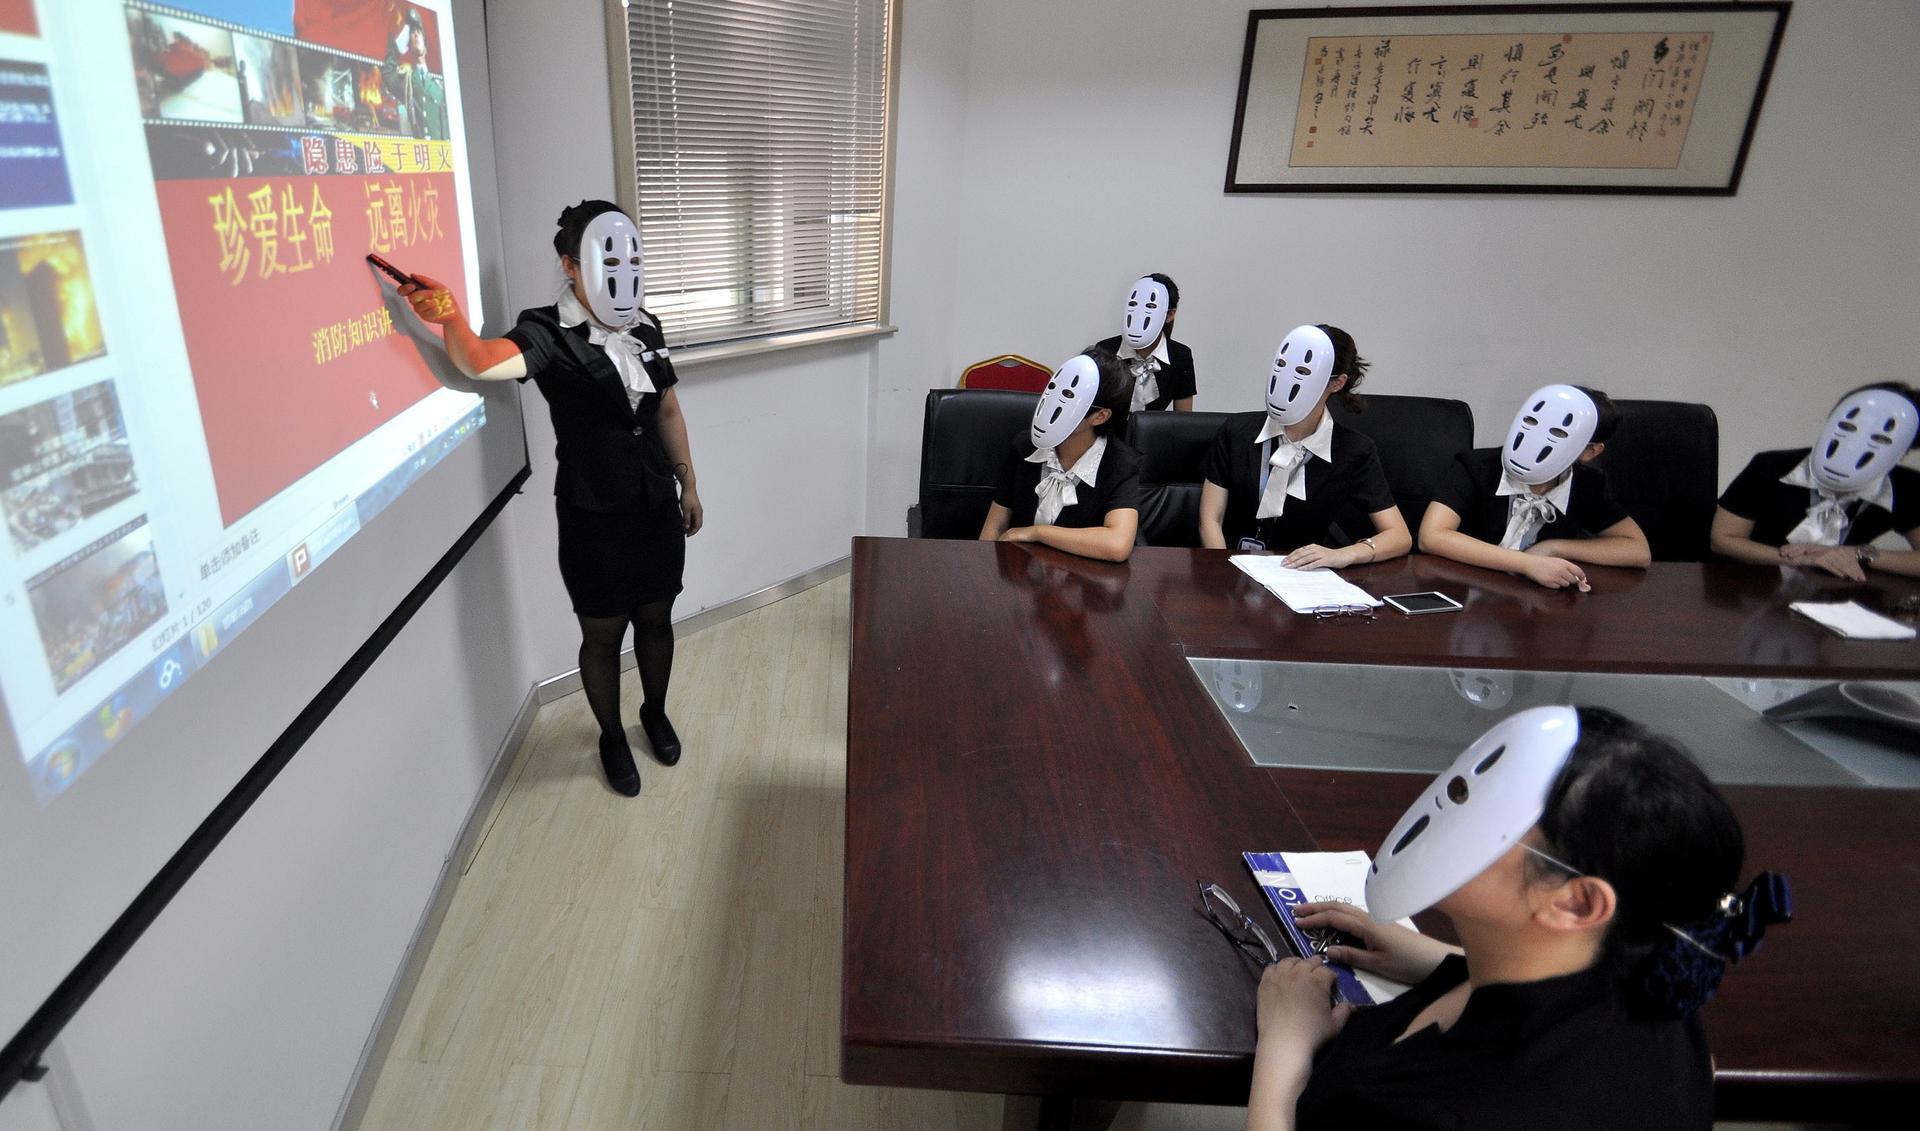 Staffs Wear No-Face Masks To Reduce Pressure During Working Time In Handan, Hebei, China